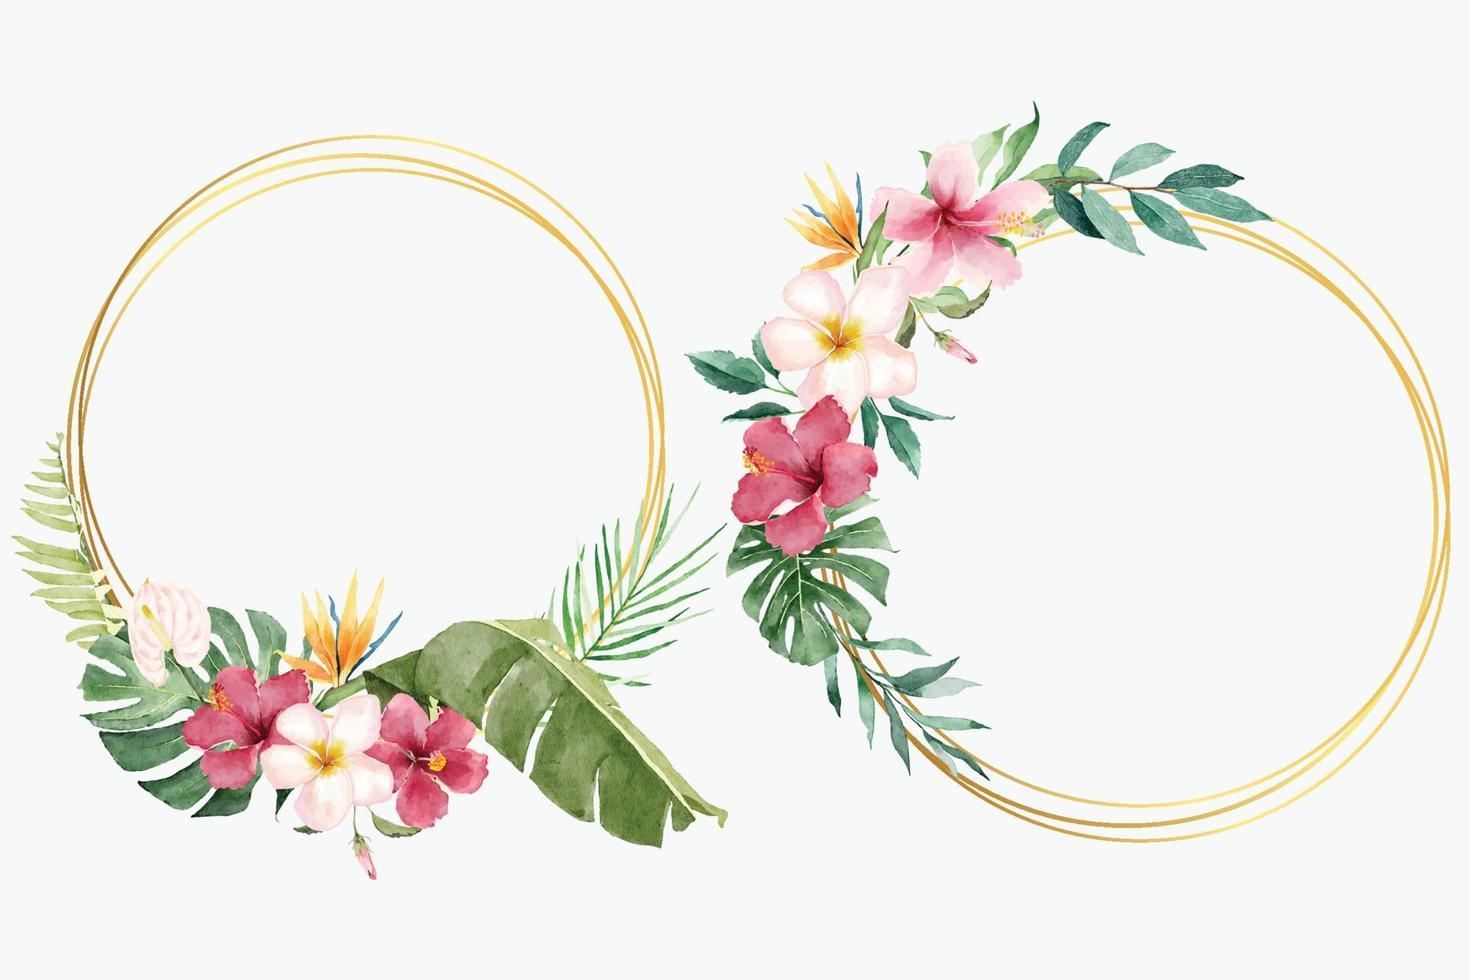 Watercolor Tropical Flowers with Round Frames vector